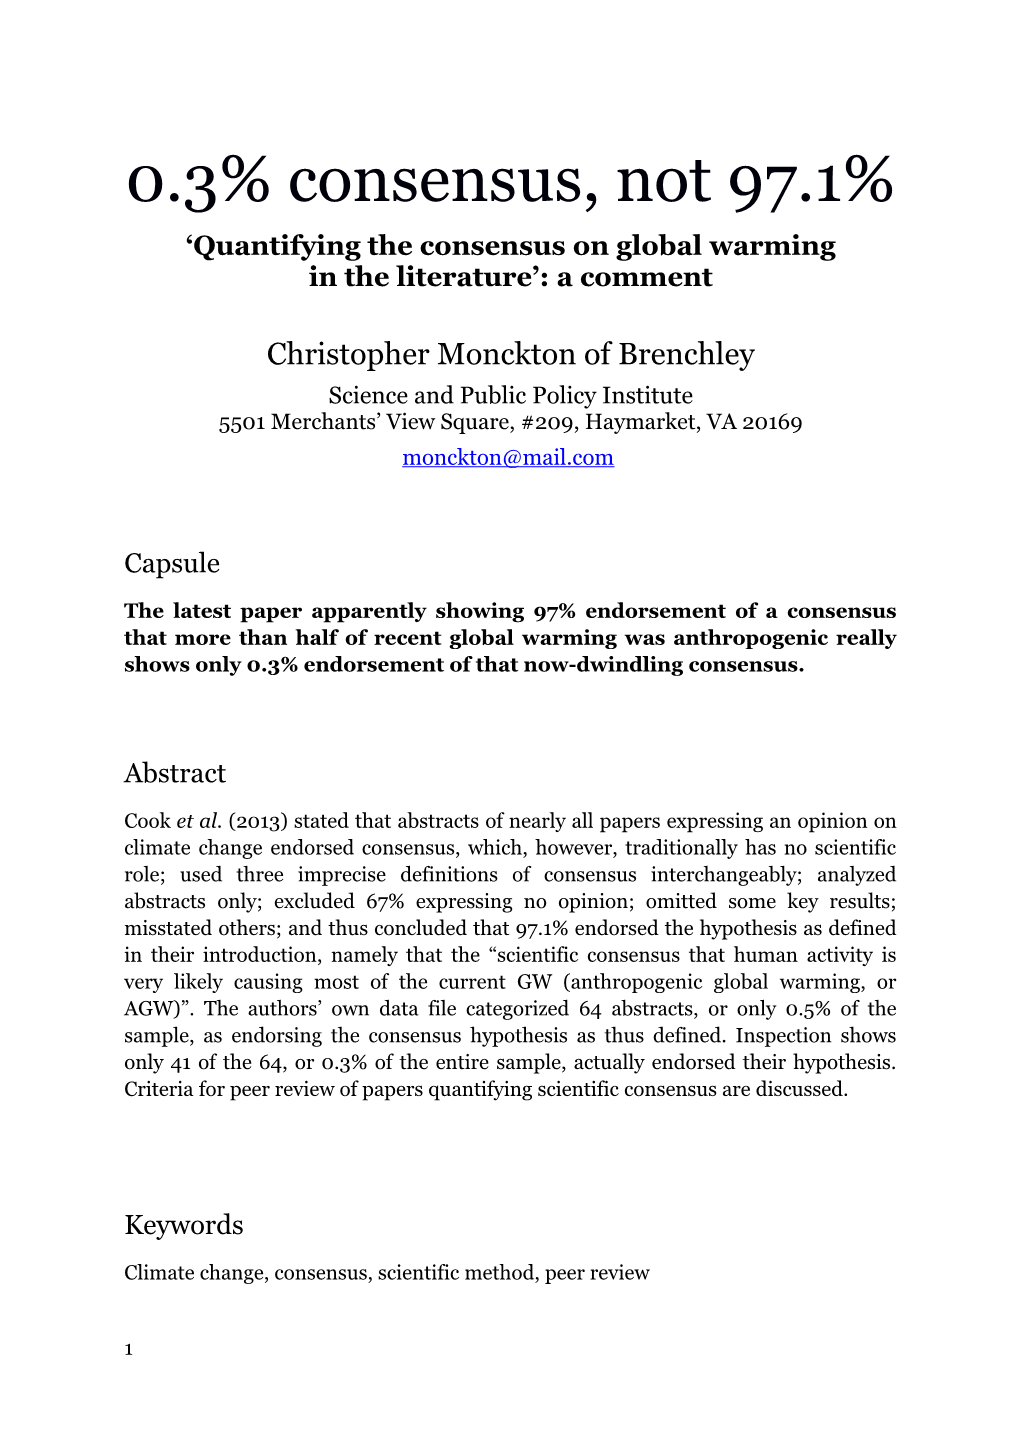 Quantifying the Consensus on Global Warming